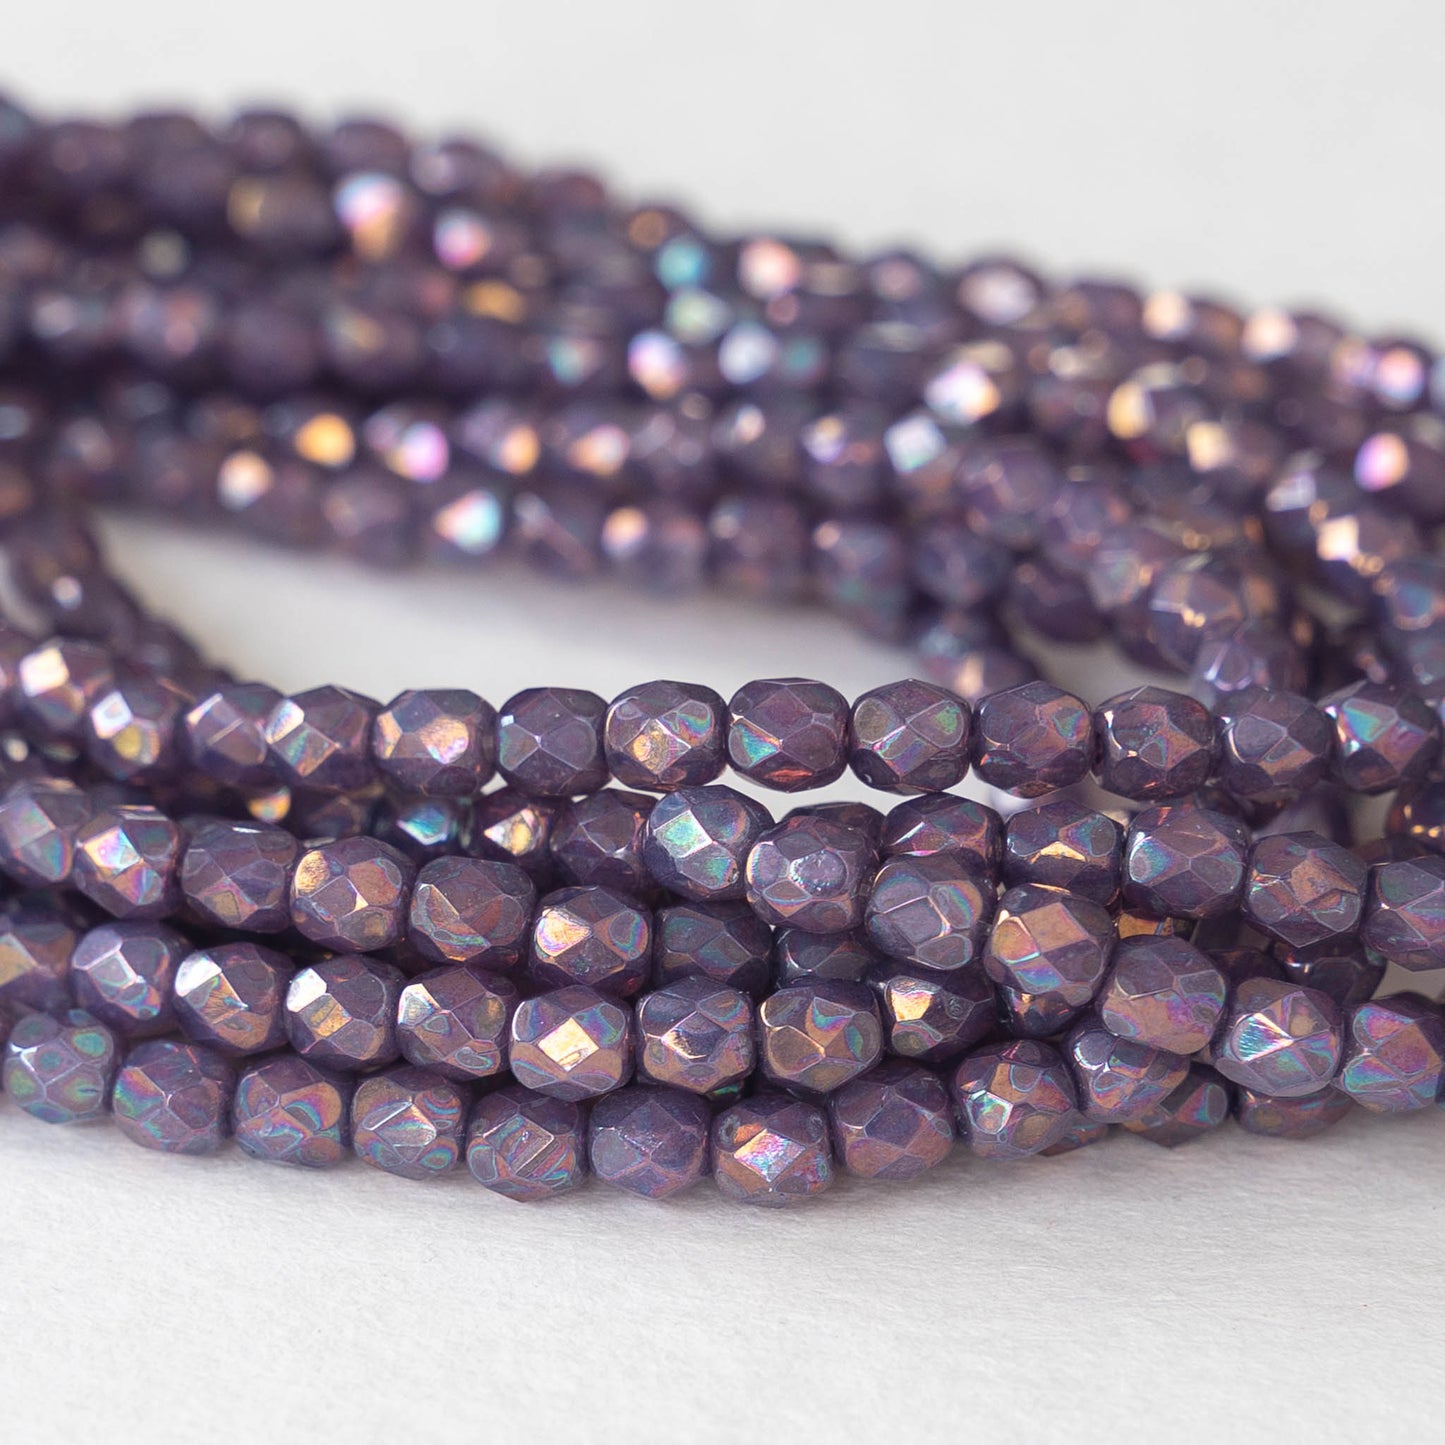 4mm Faceted Round Beads -  Milky Purple Luster - 50 beads